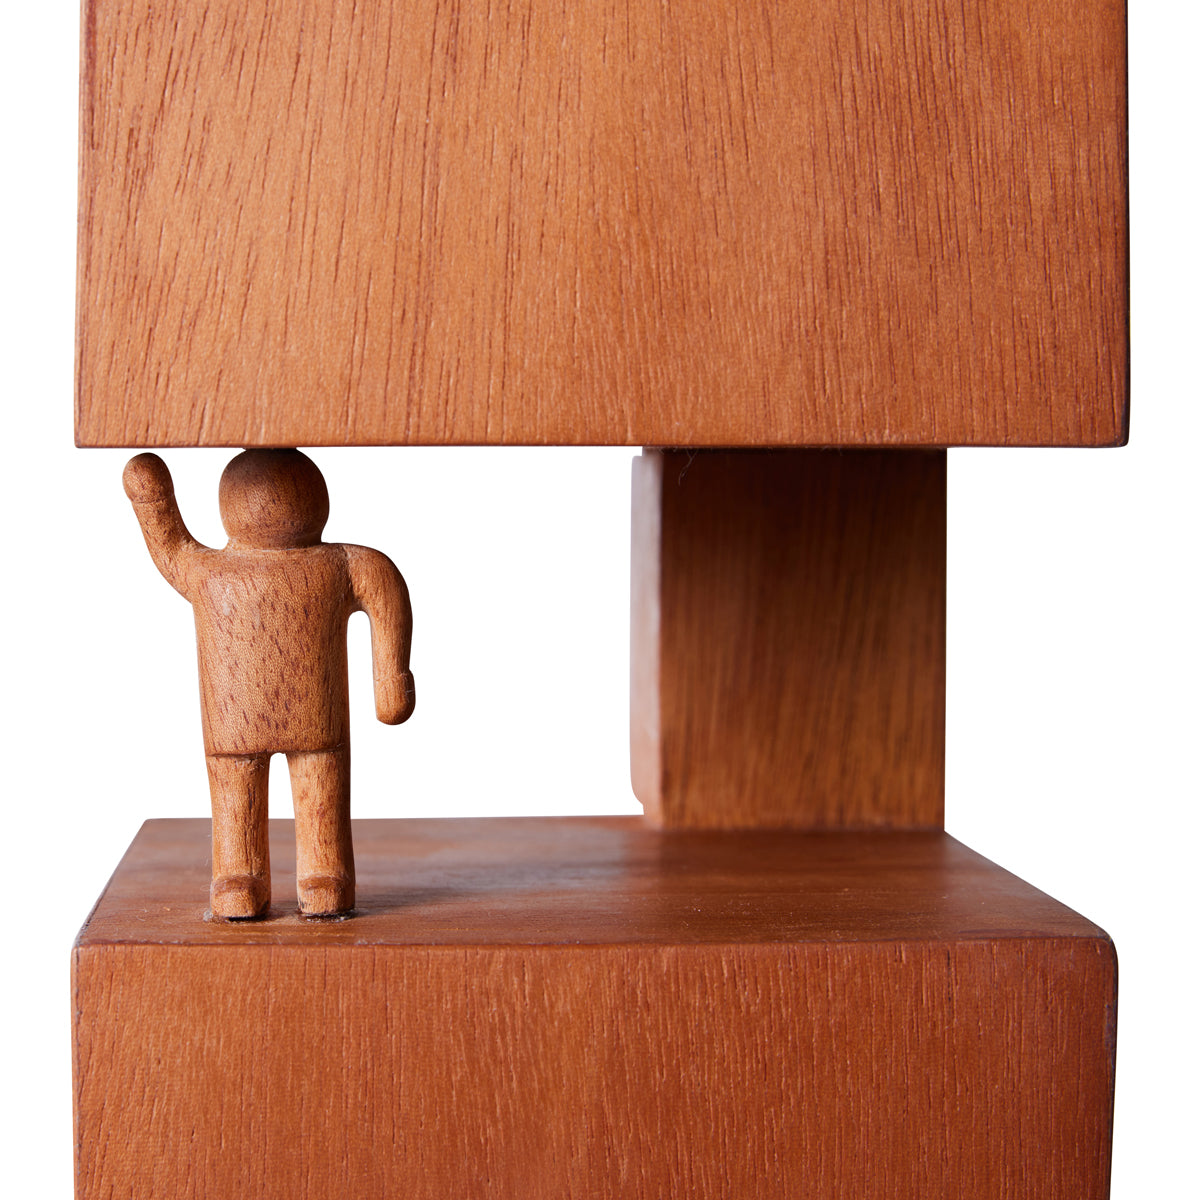 HKLiving Hk Objects: Empowered Wooden Sculpture 